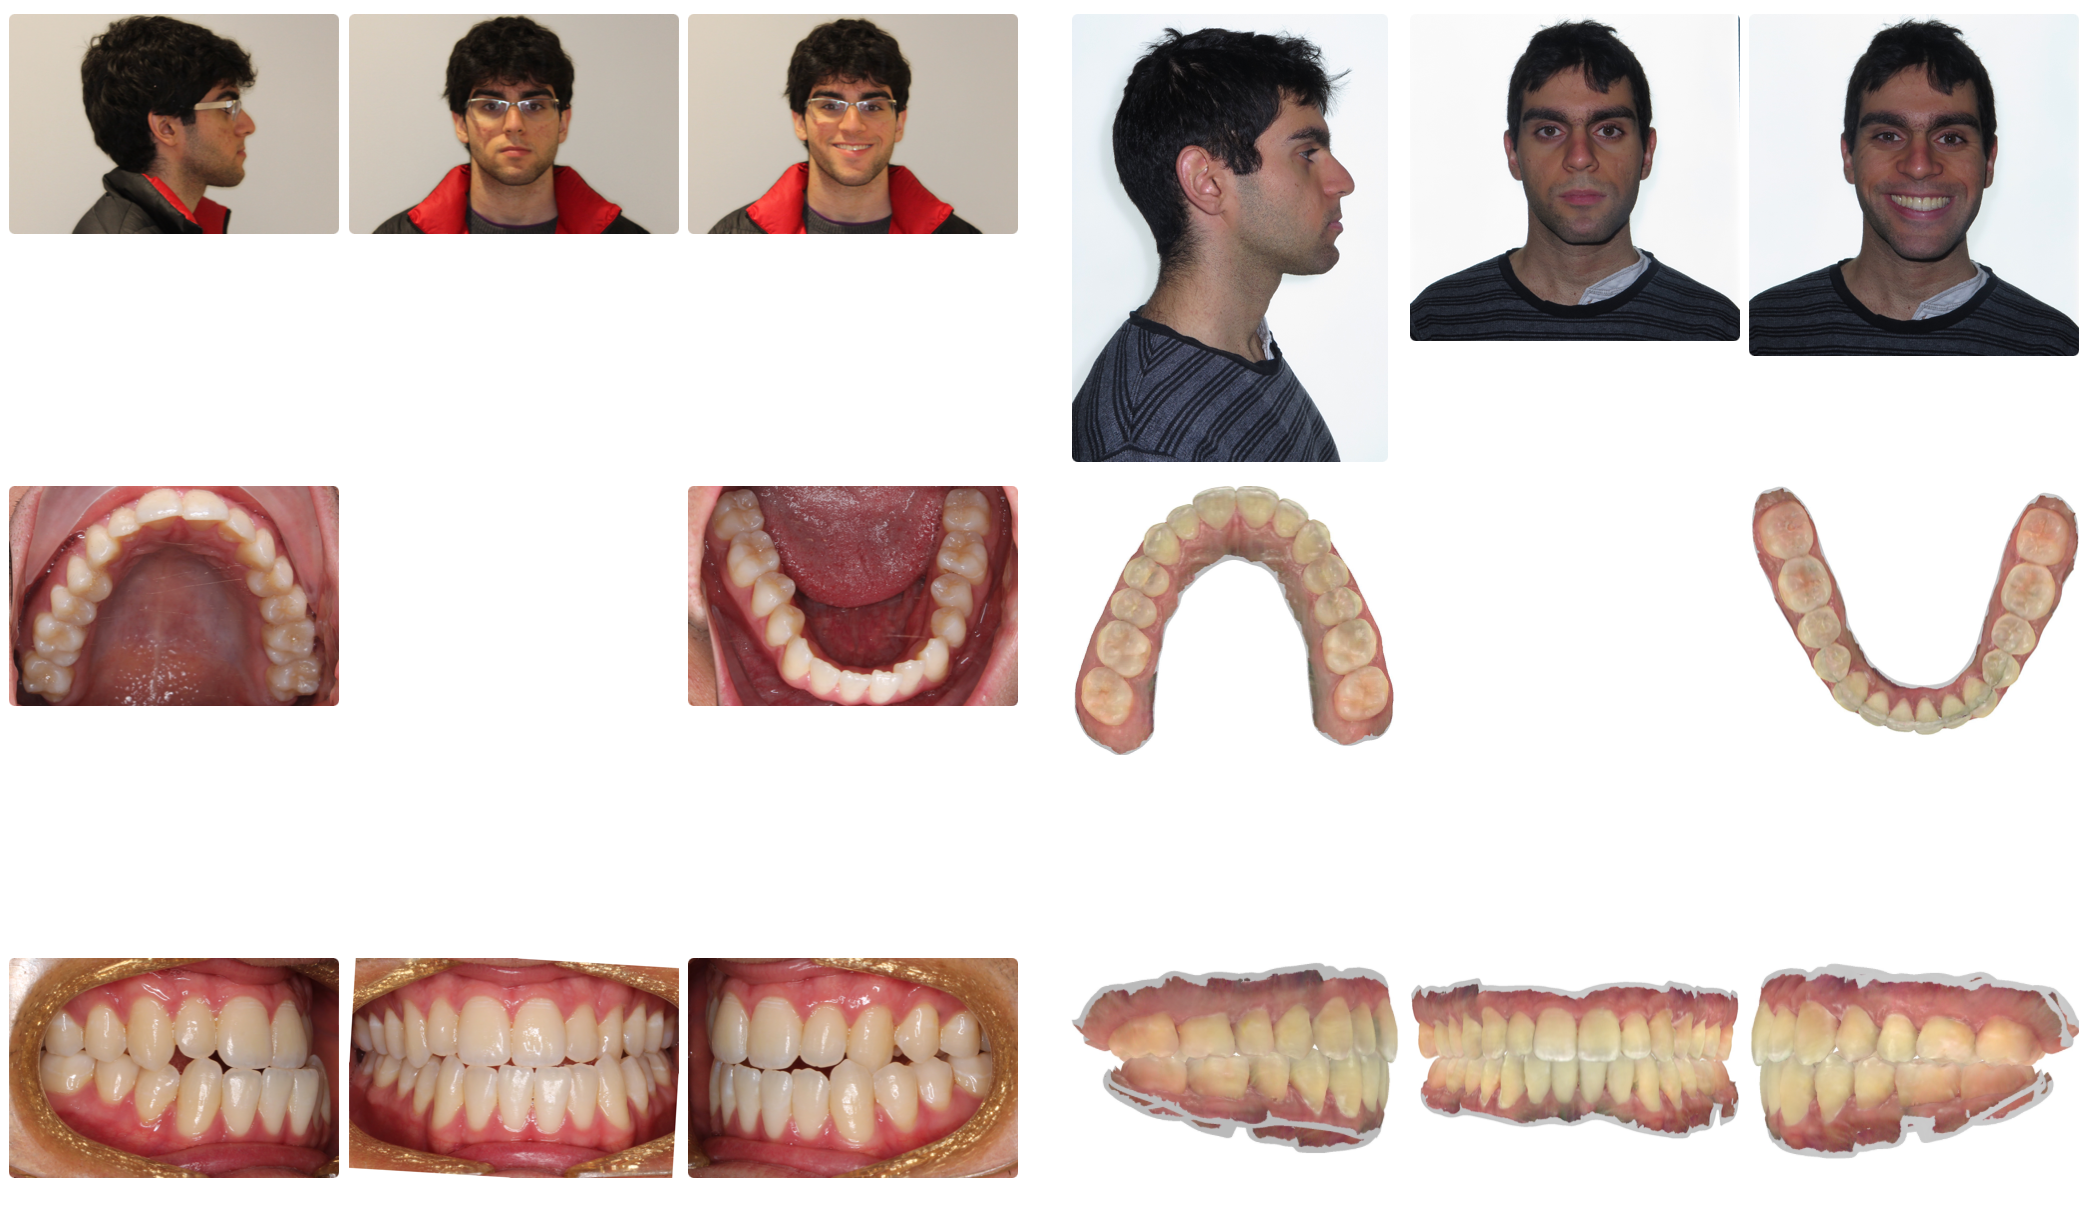 corrective jaw surgery to fix an underbite